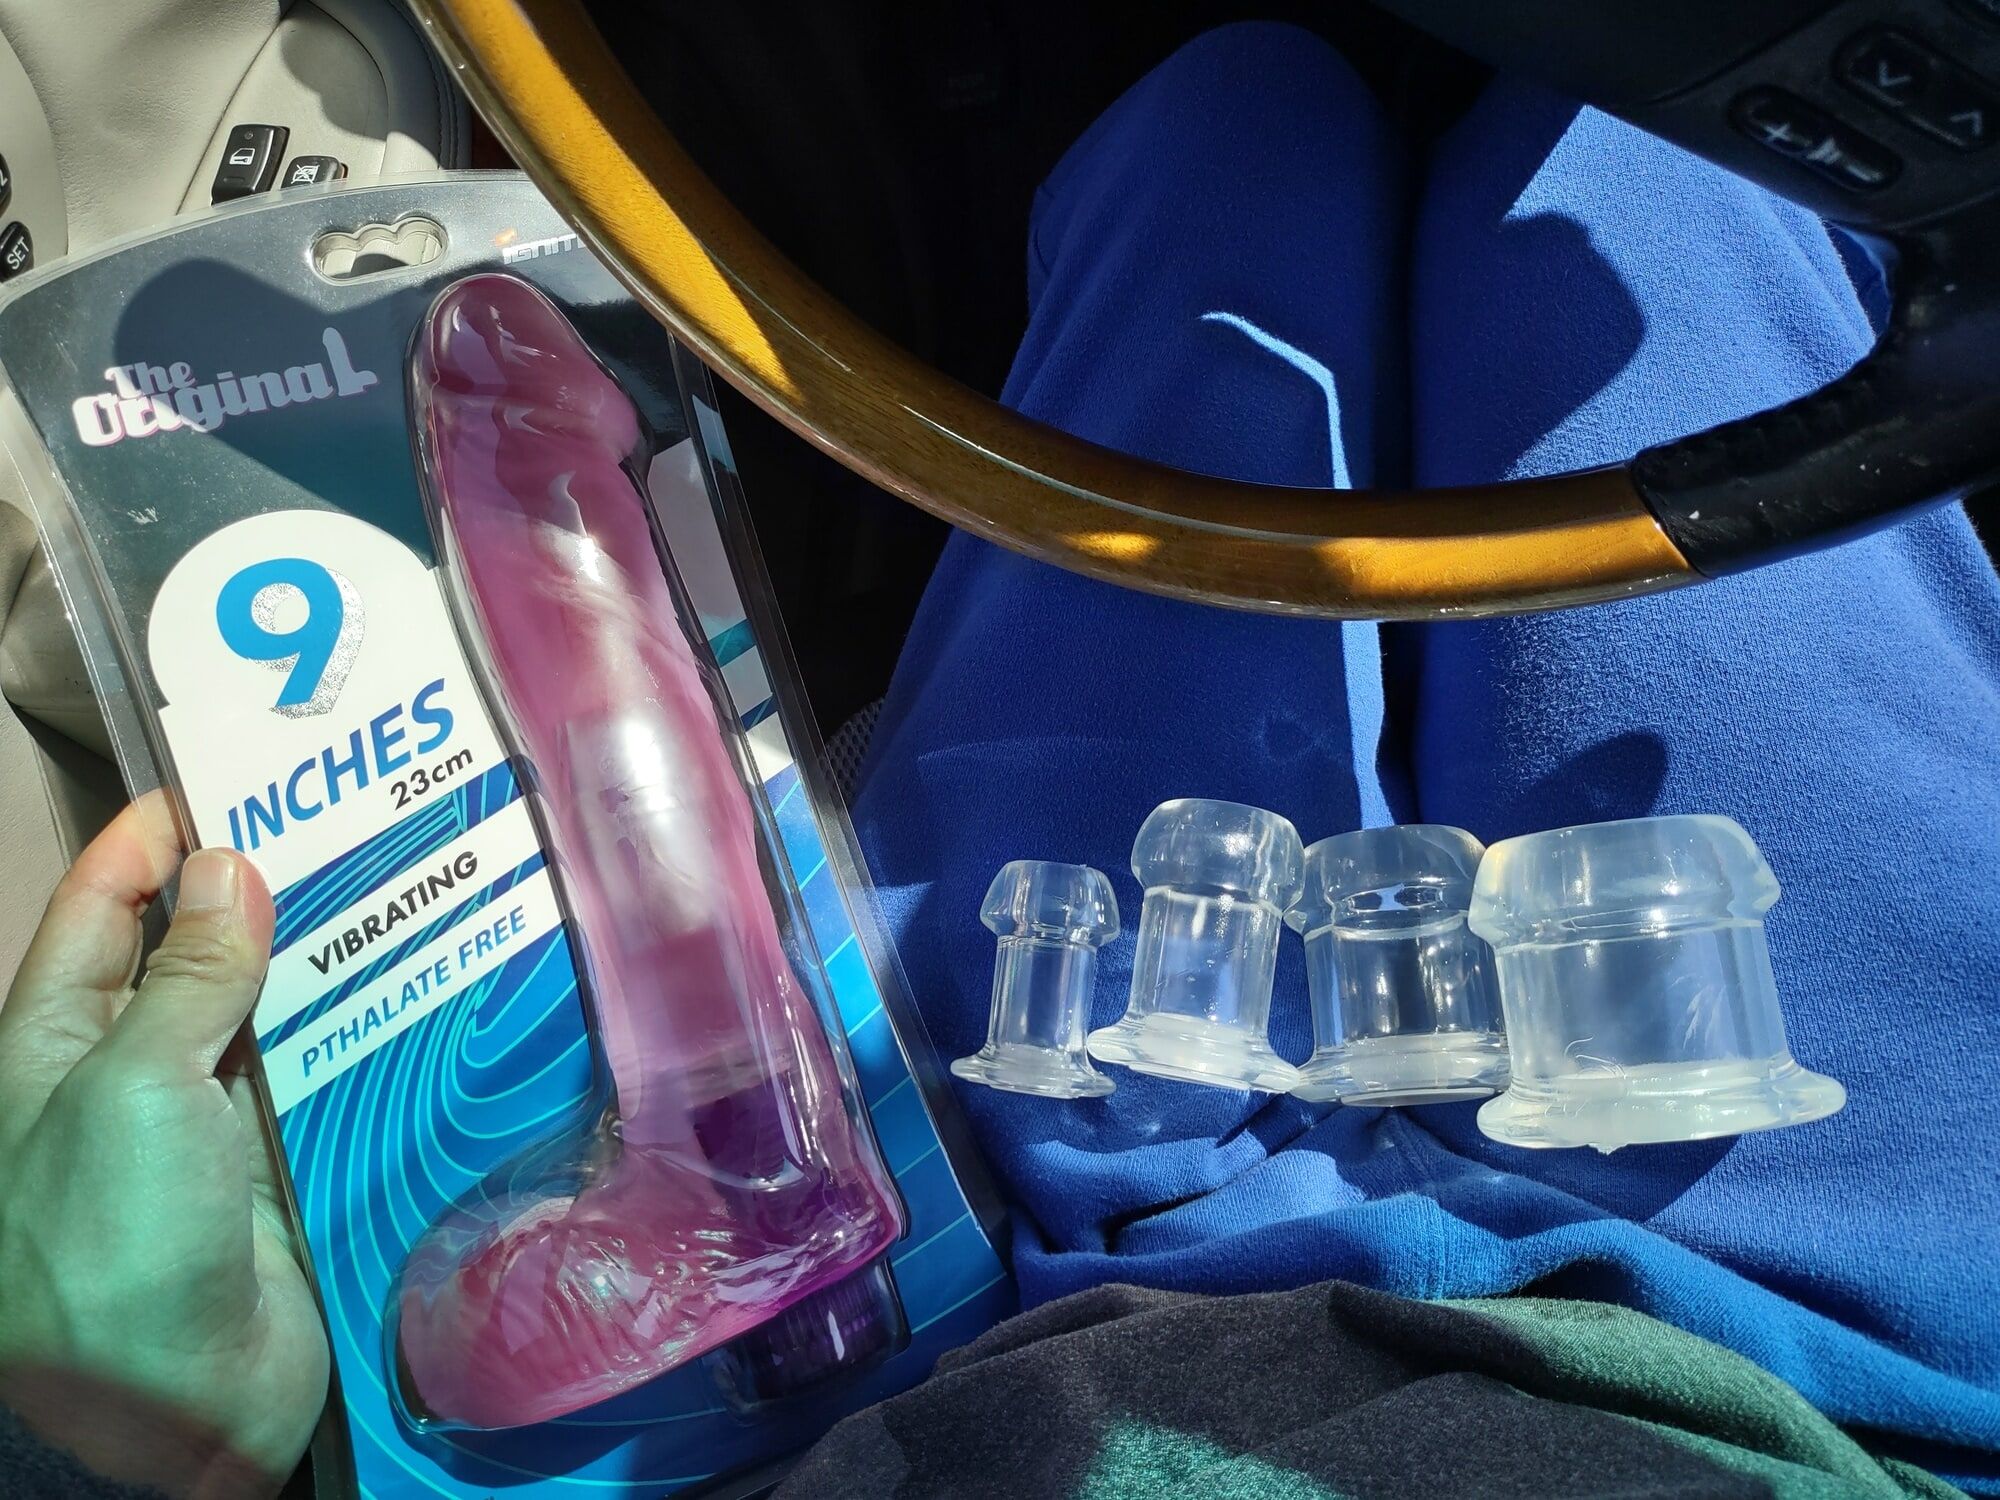 New sex toys. Hollow tubes for inserting and giant dildo #7